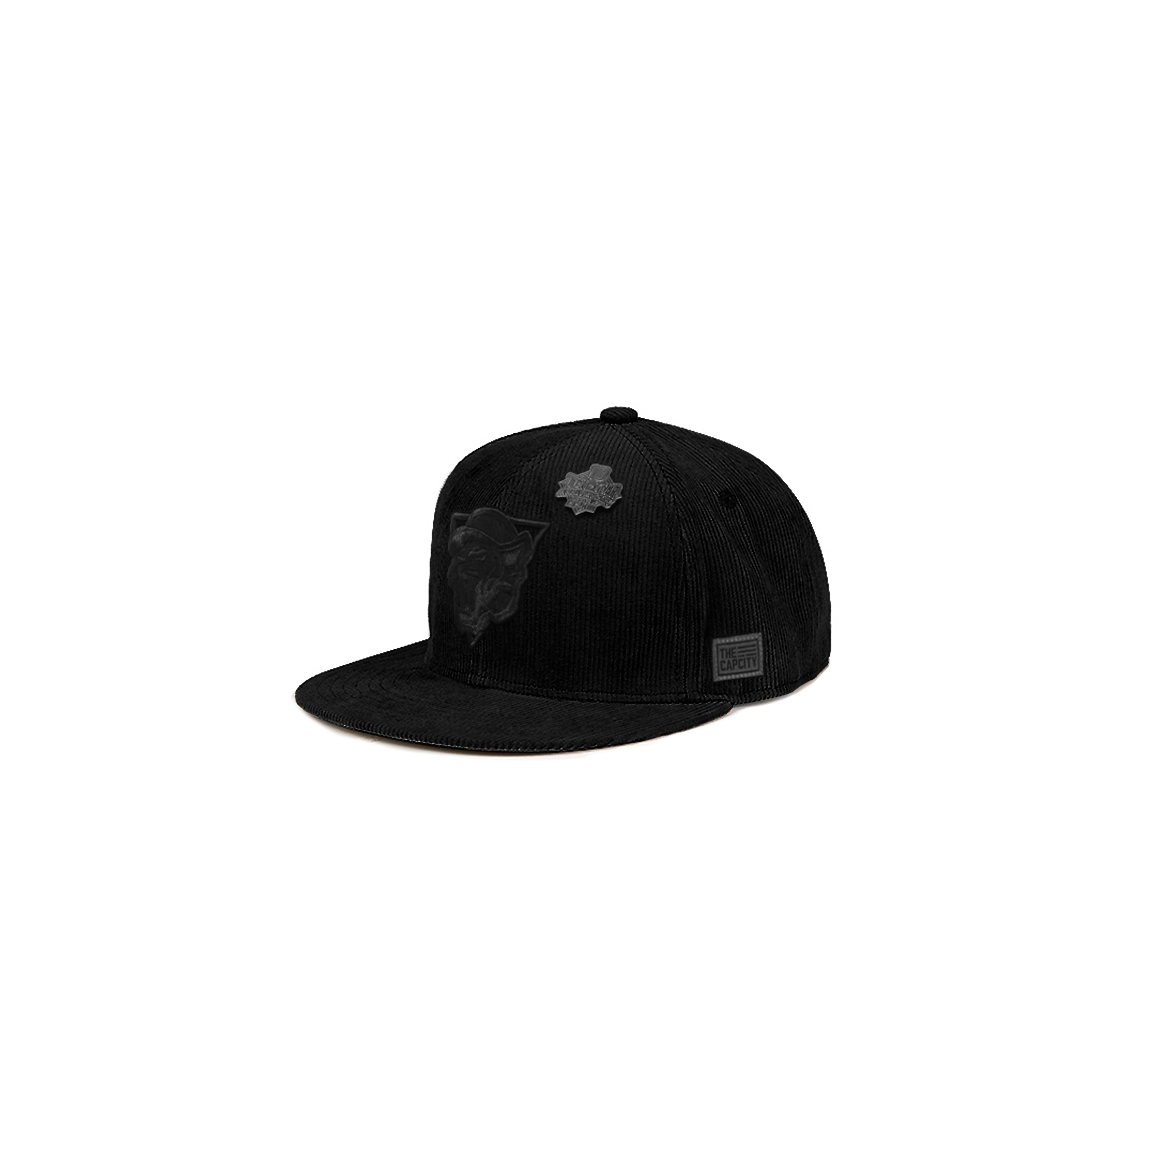 TCC KL LEGACY CLASSIC SNAPBACK COLLECTION – The Cap City